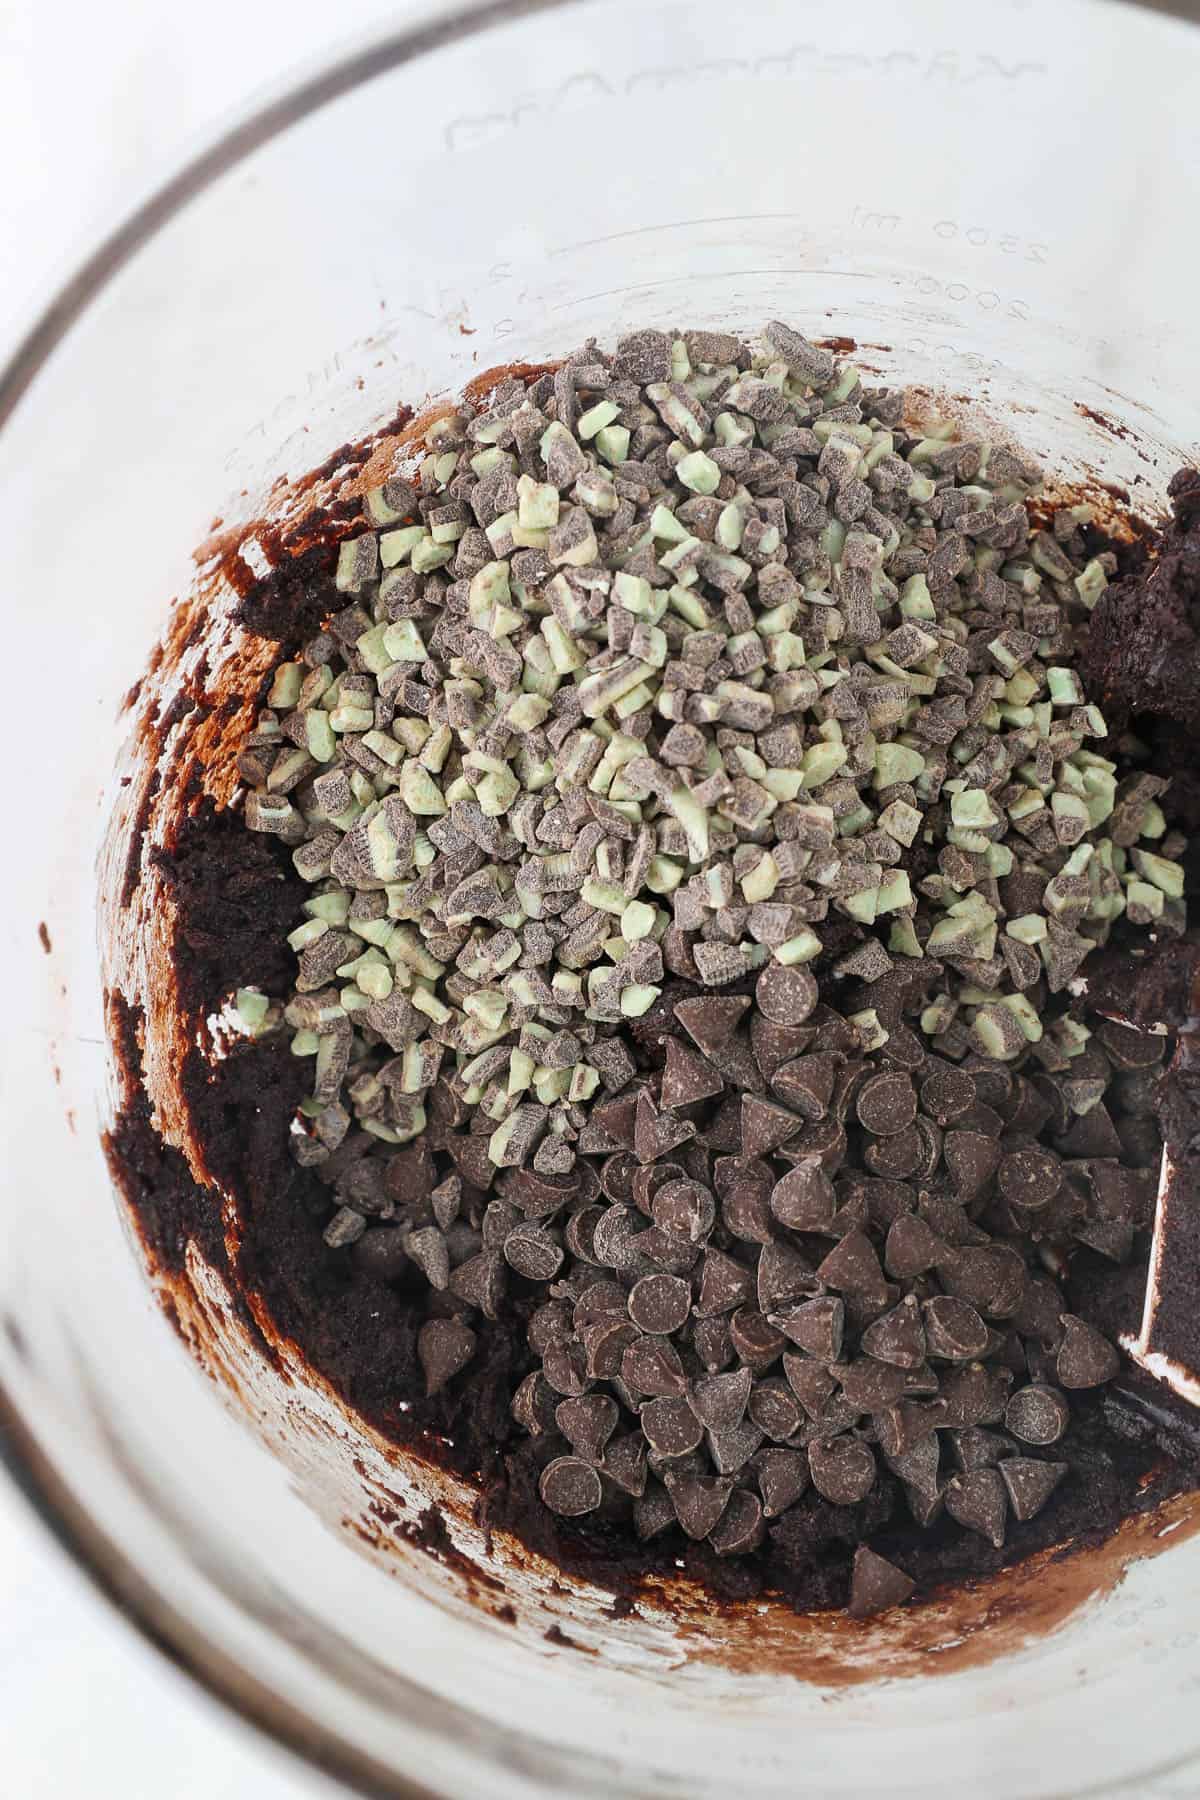 Chopped up Andes Mint candies added to chocolate cookie dough in a mixing bowl.